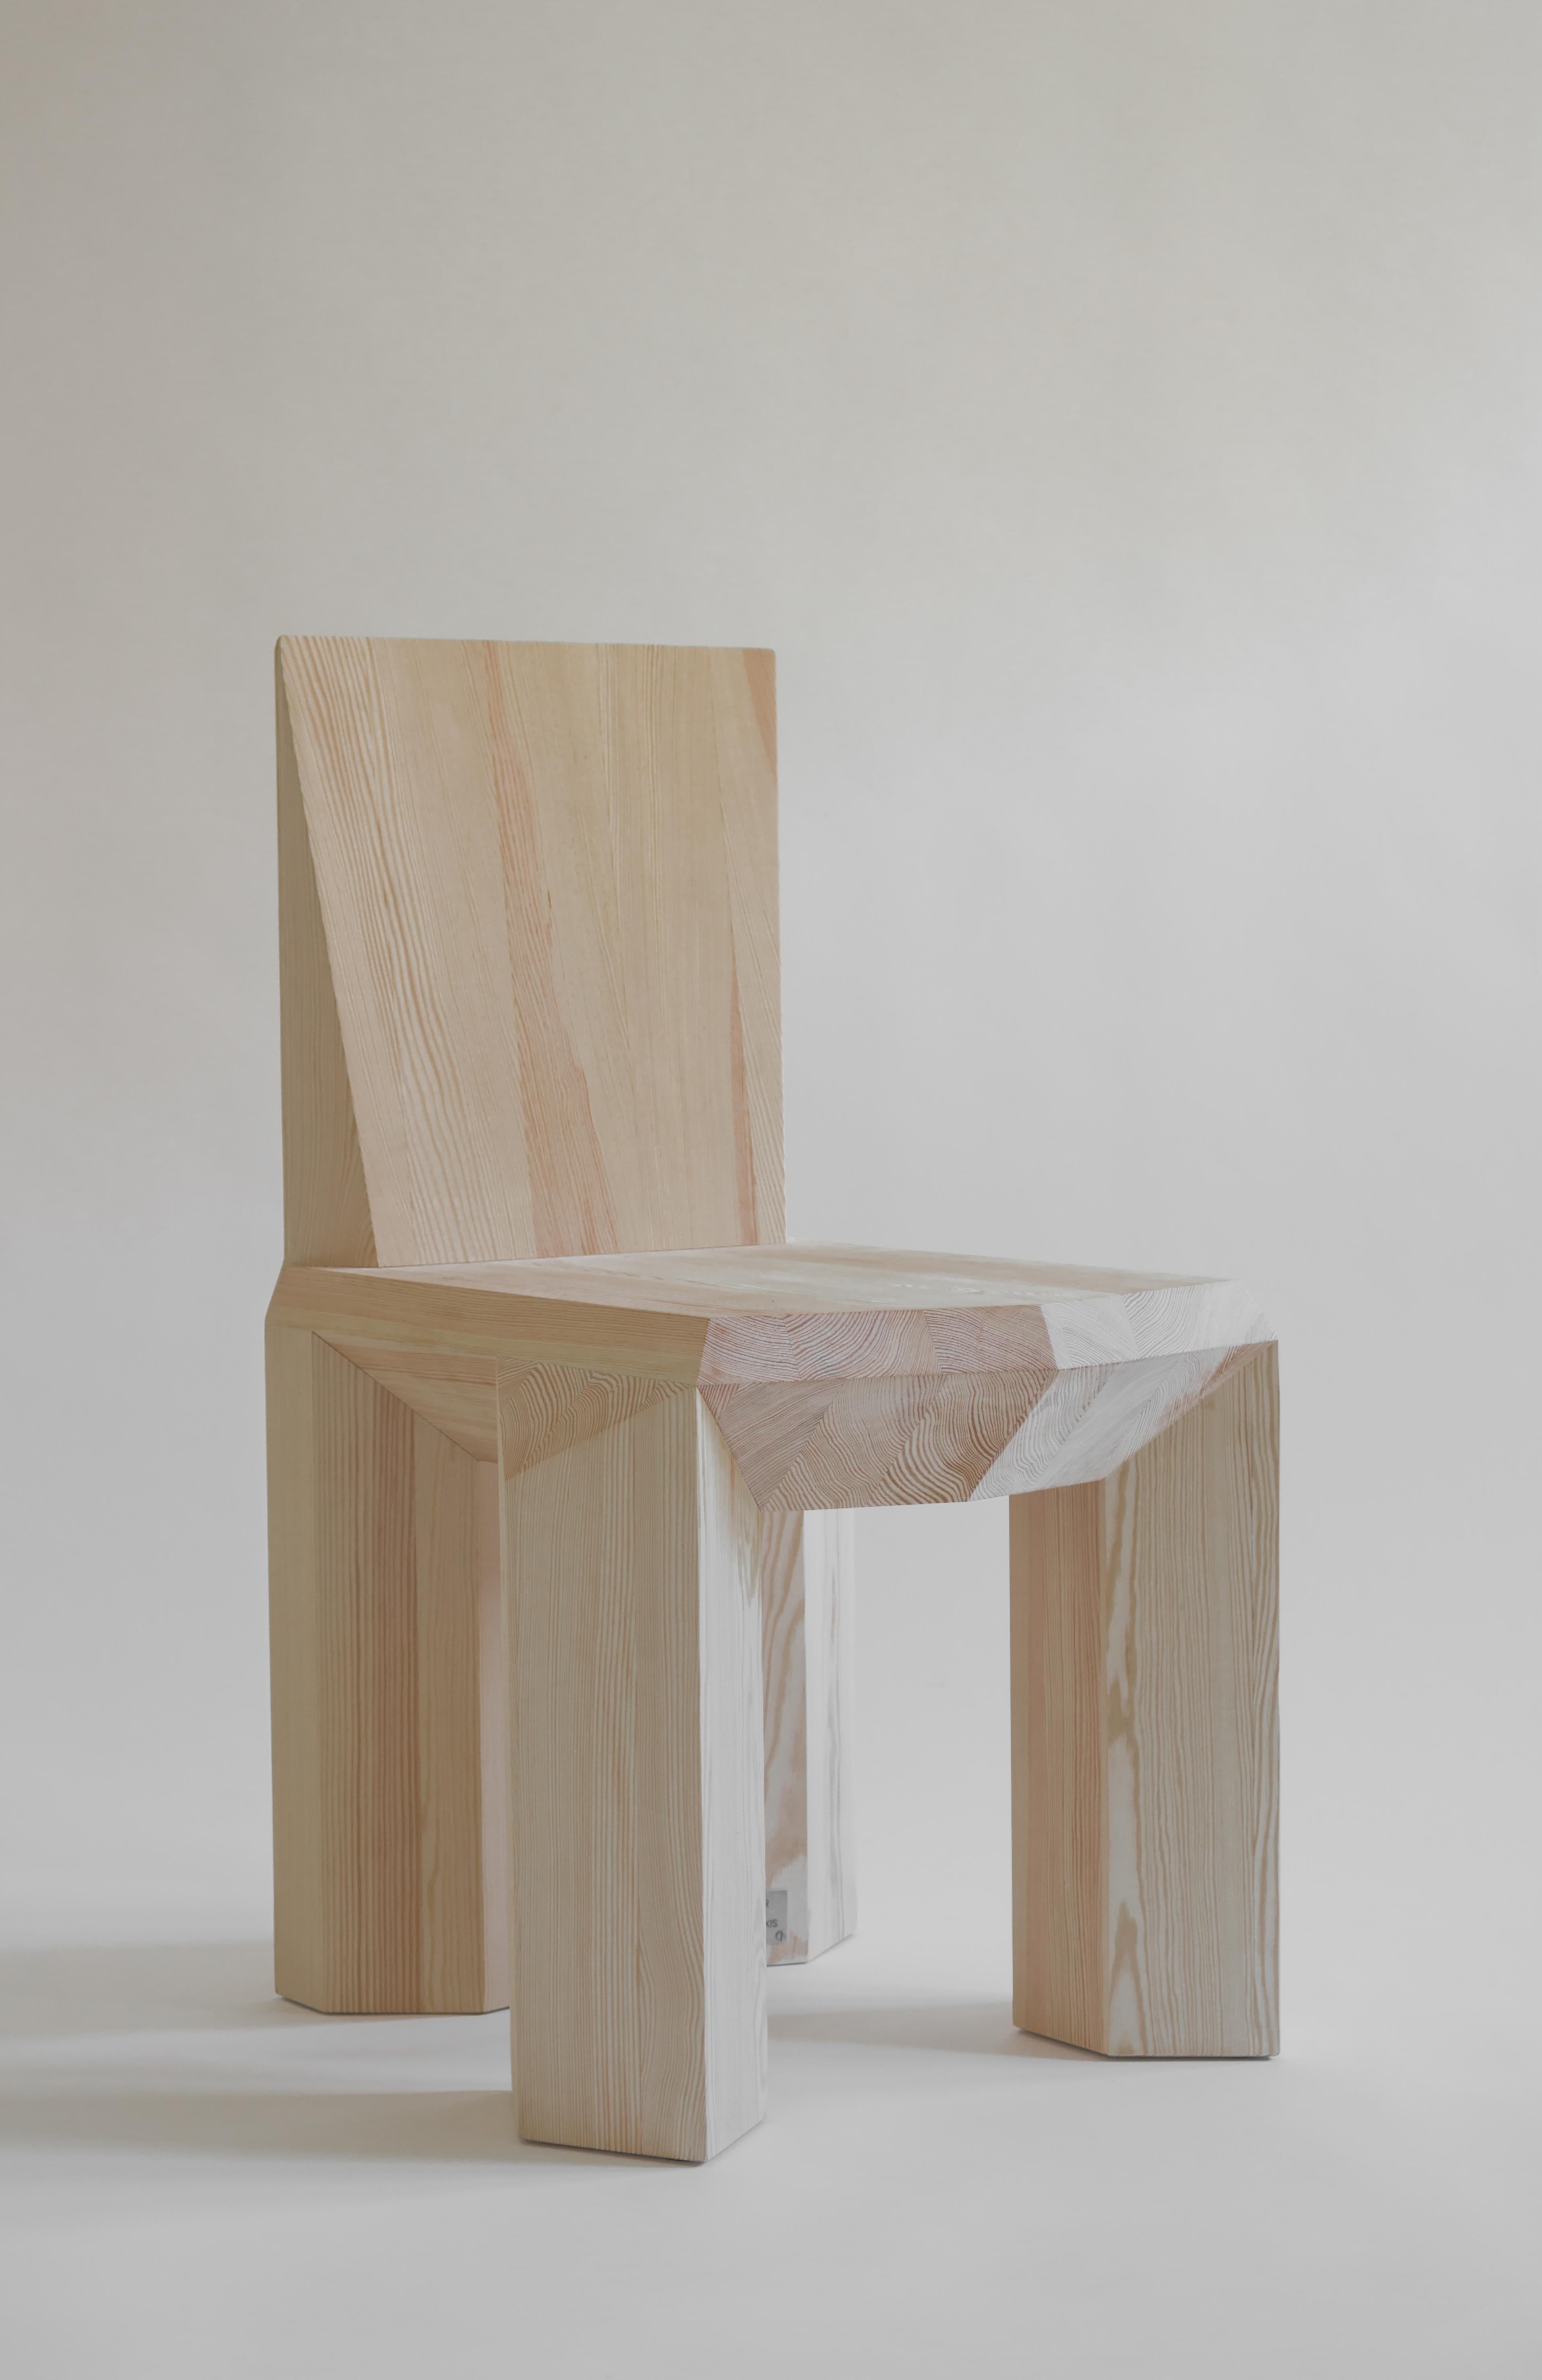 Ode chair by Sizar Alexis
Signed and Numered
Edition of 12
Dimensions: Length 45 x width 55 x height 74 cm
Materials: Burned pine wood

The hexagon has more to it than we think, and some of the aspects of this shape are still
mysterious. The